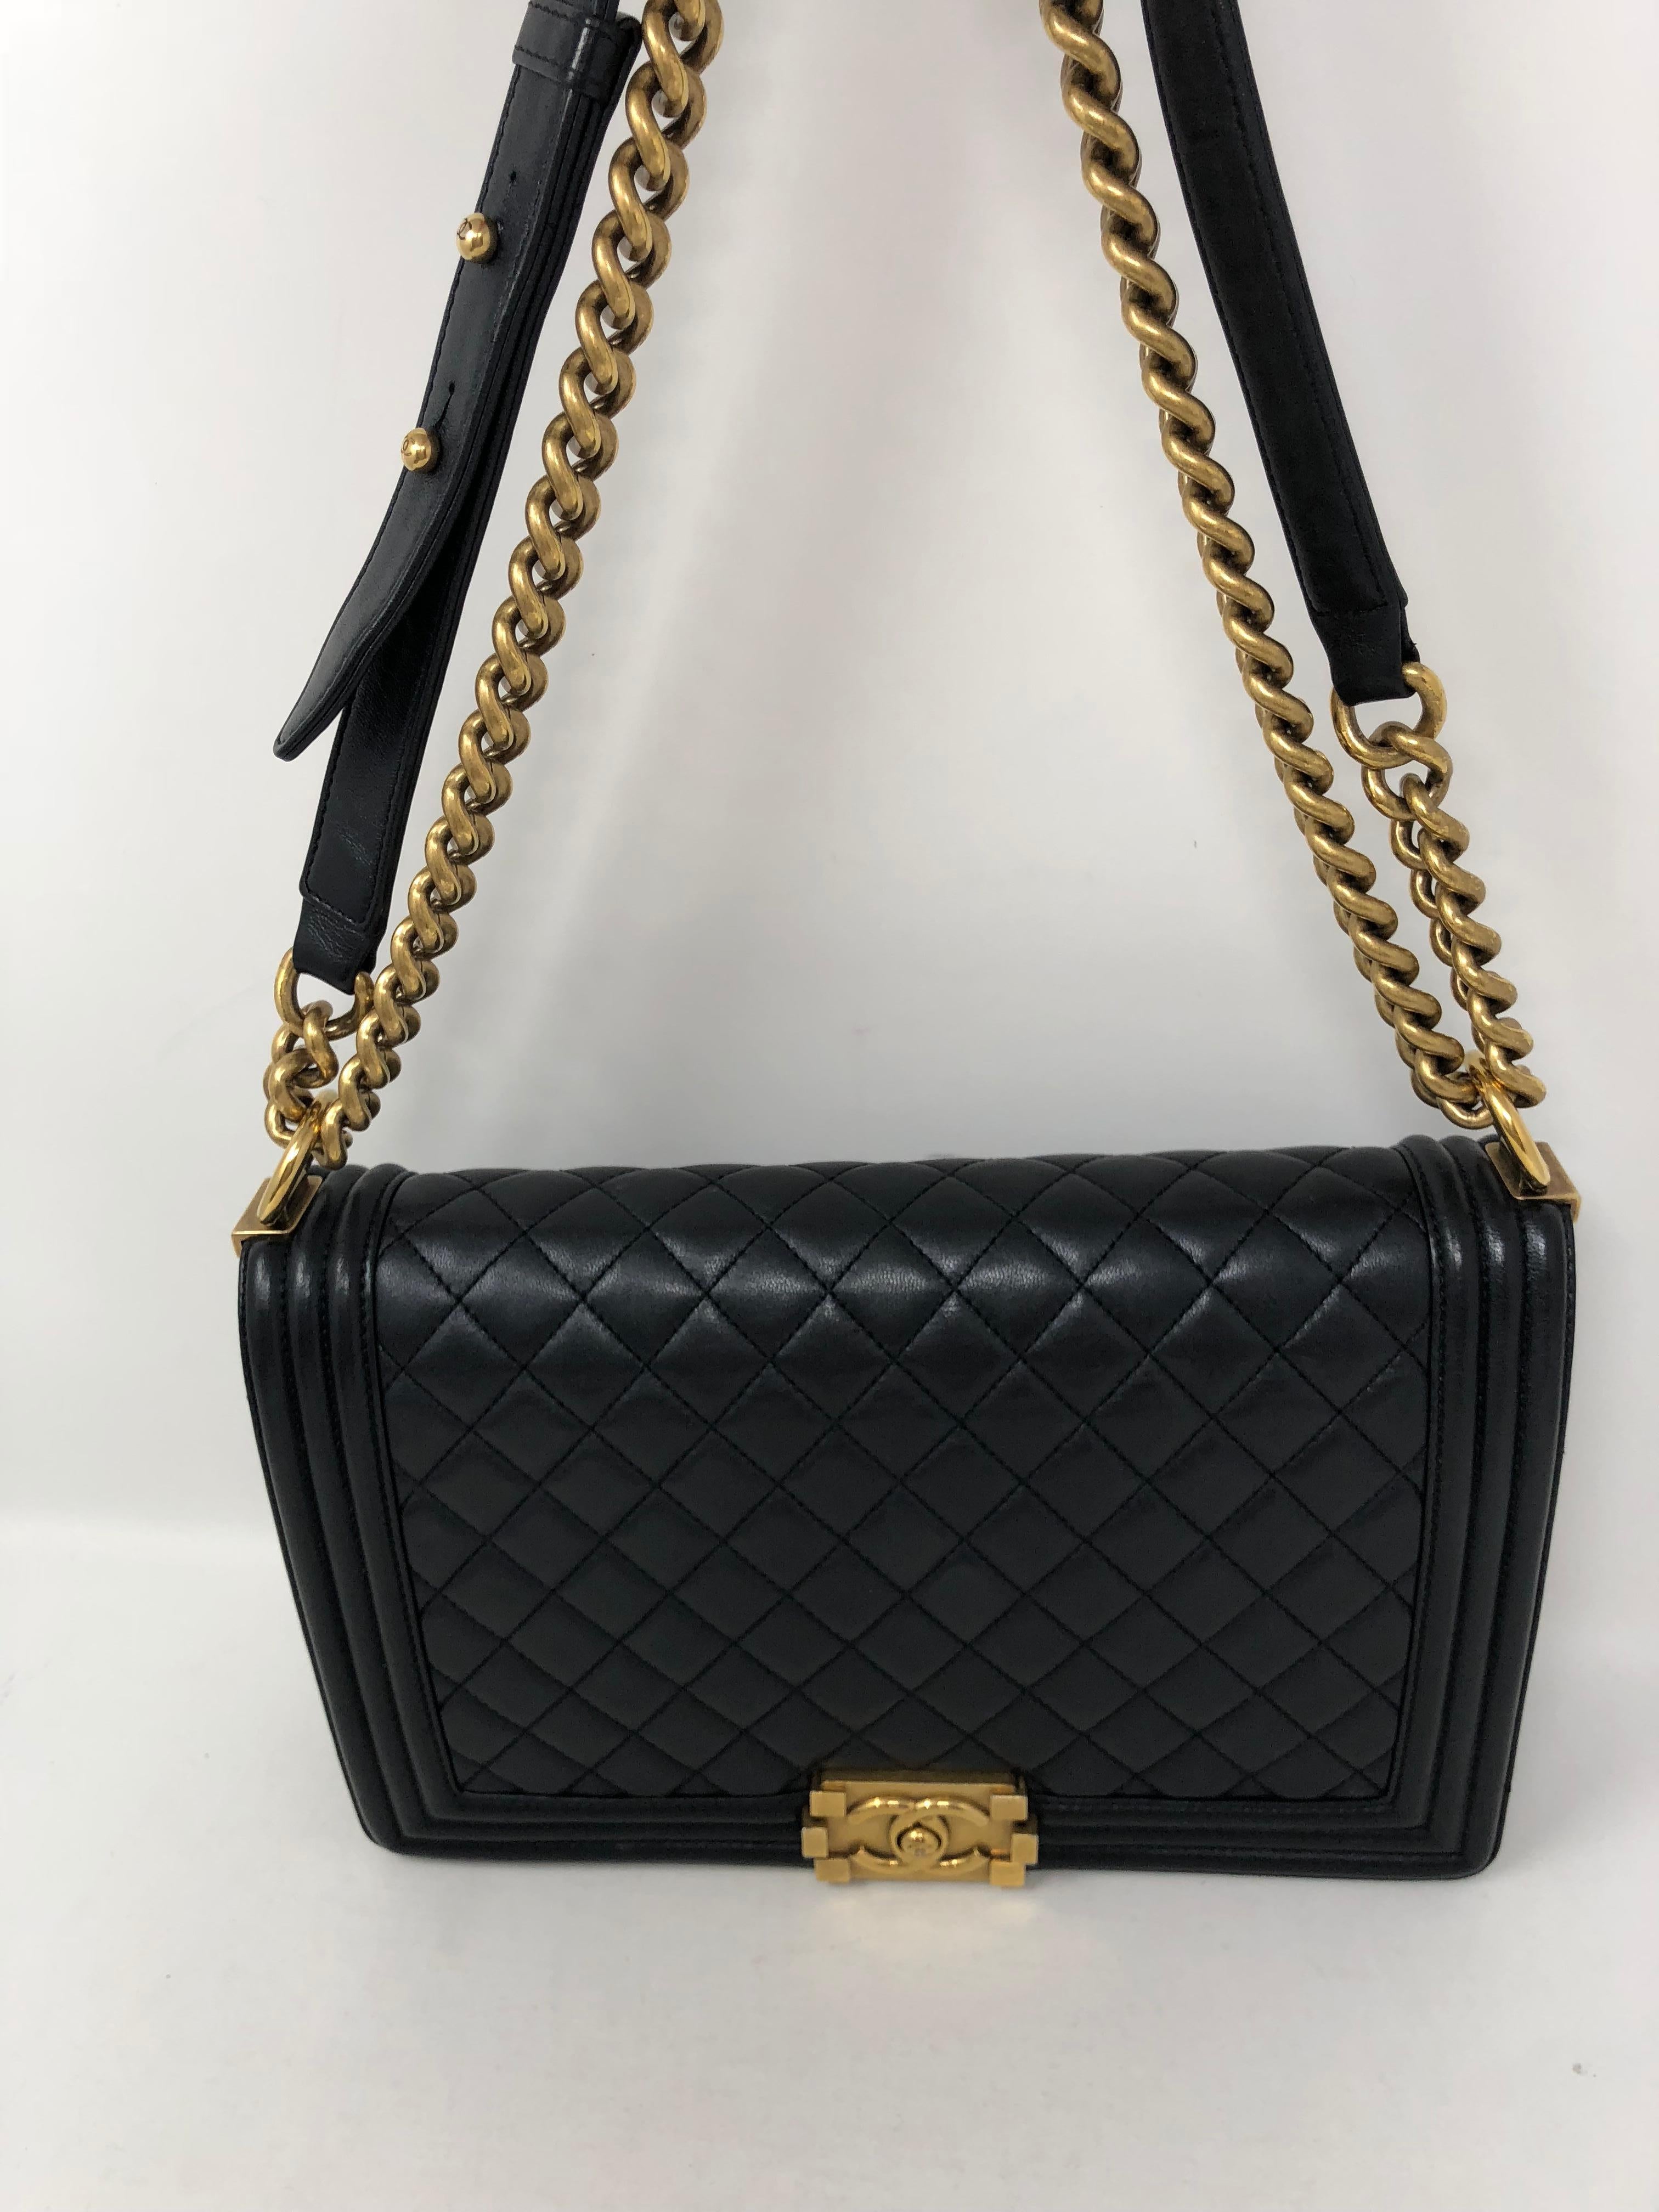 Chanel Black Boy Bag Gold Hardware. Can be worn crossbody or doubled. Black lambskin leather in good condition. Old medium size. Guaranteed authentic. 